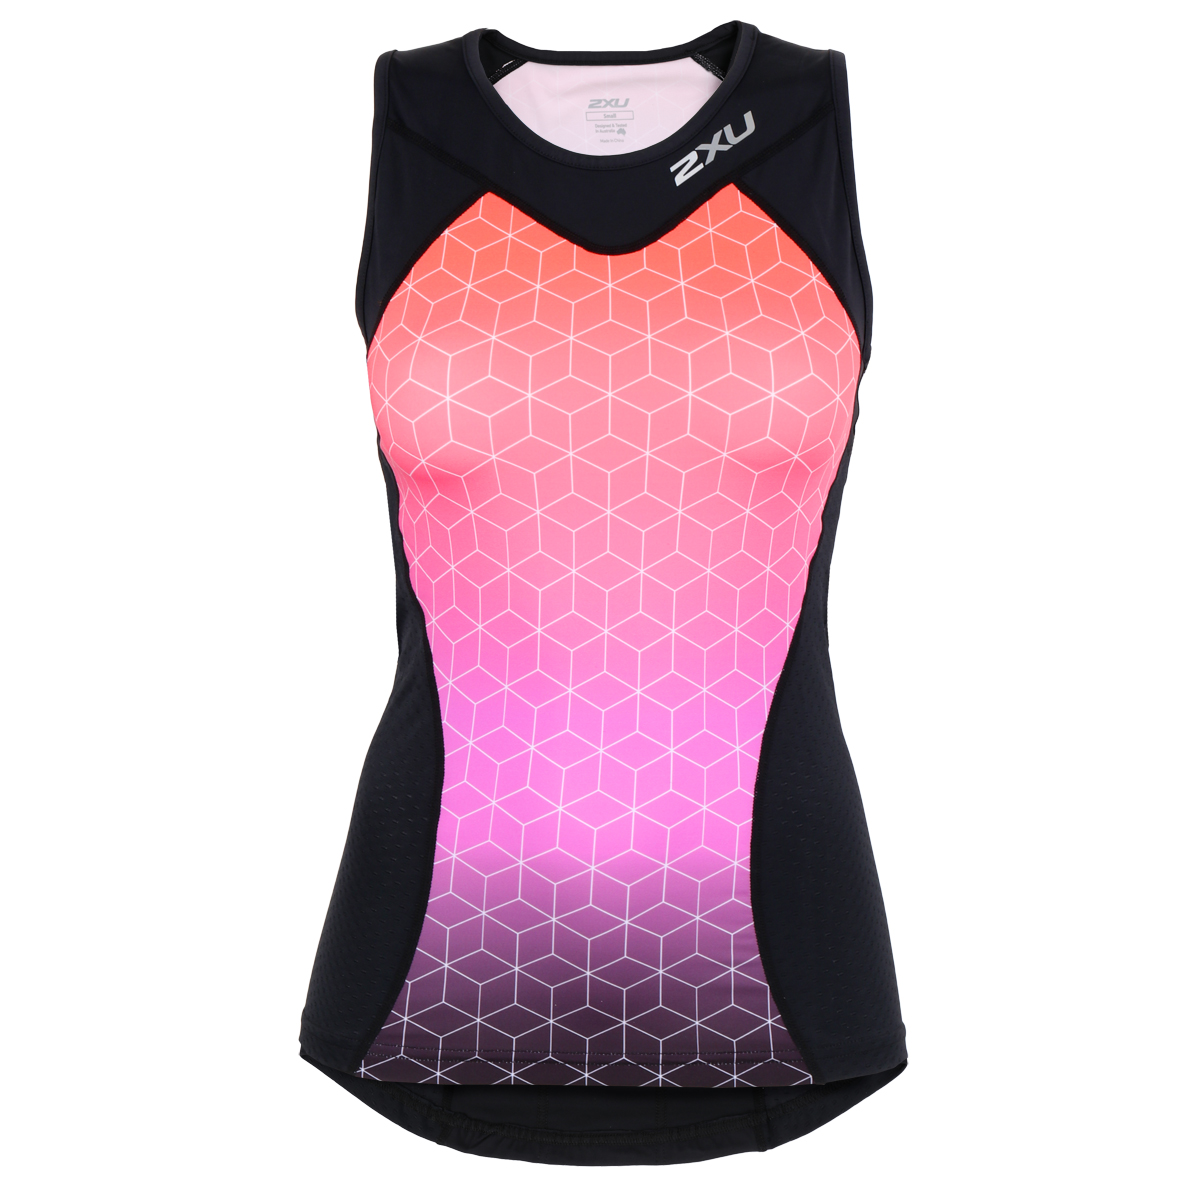 Image of 2XU Active Women's Tri Singlet - black/sunset ombre